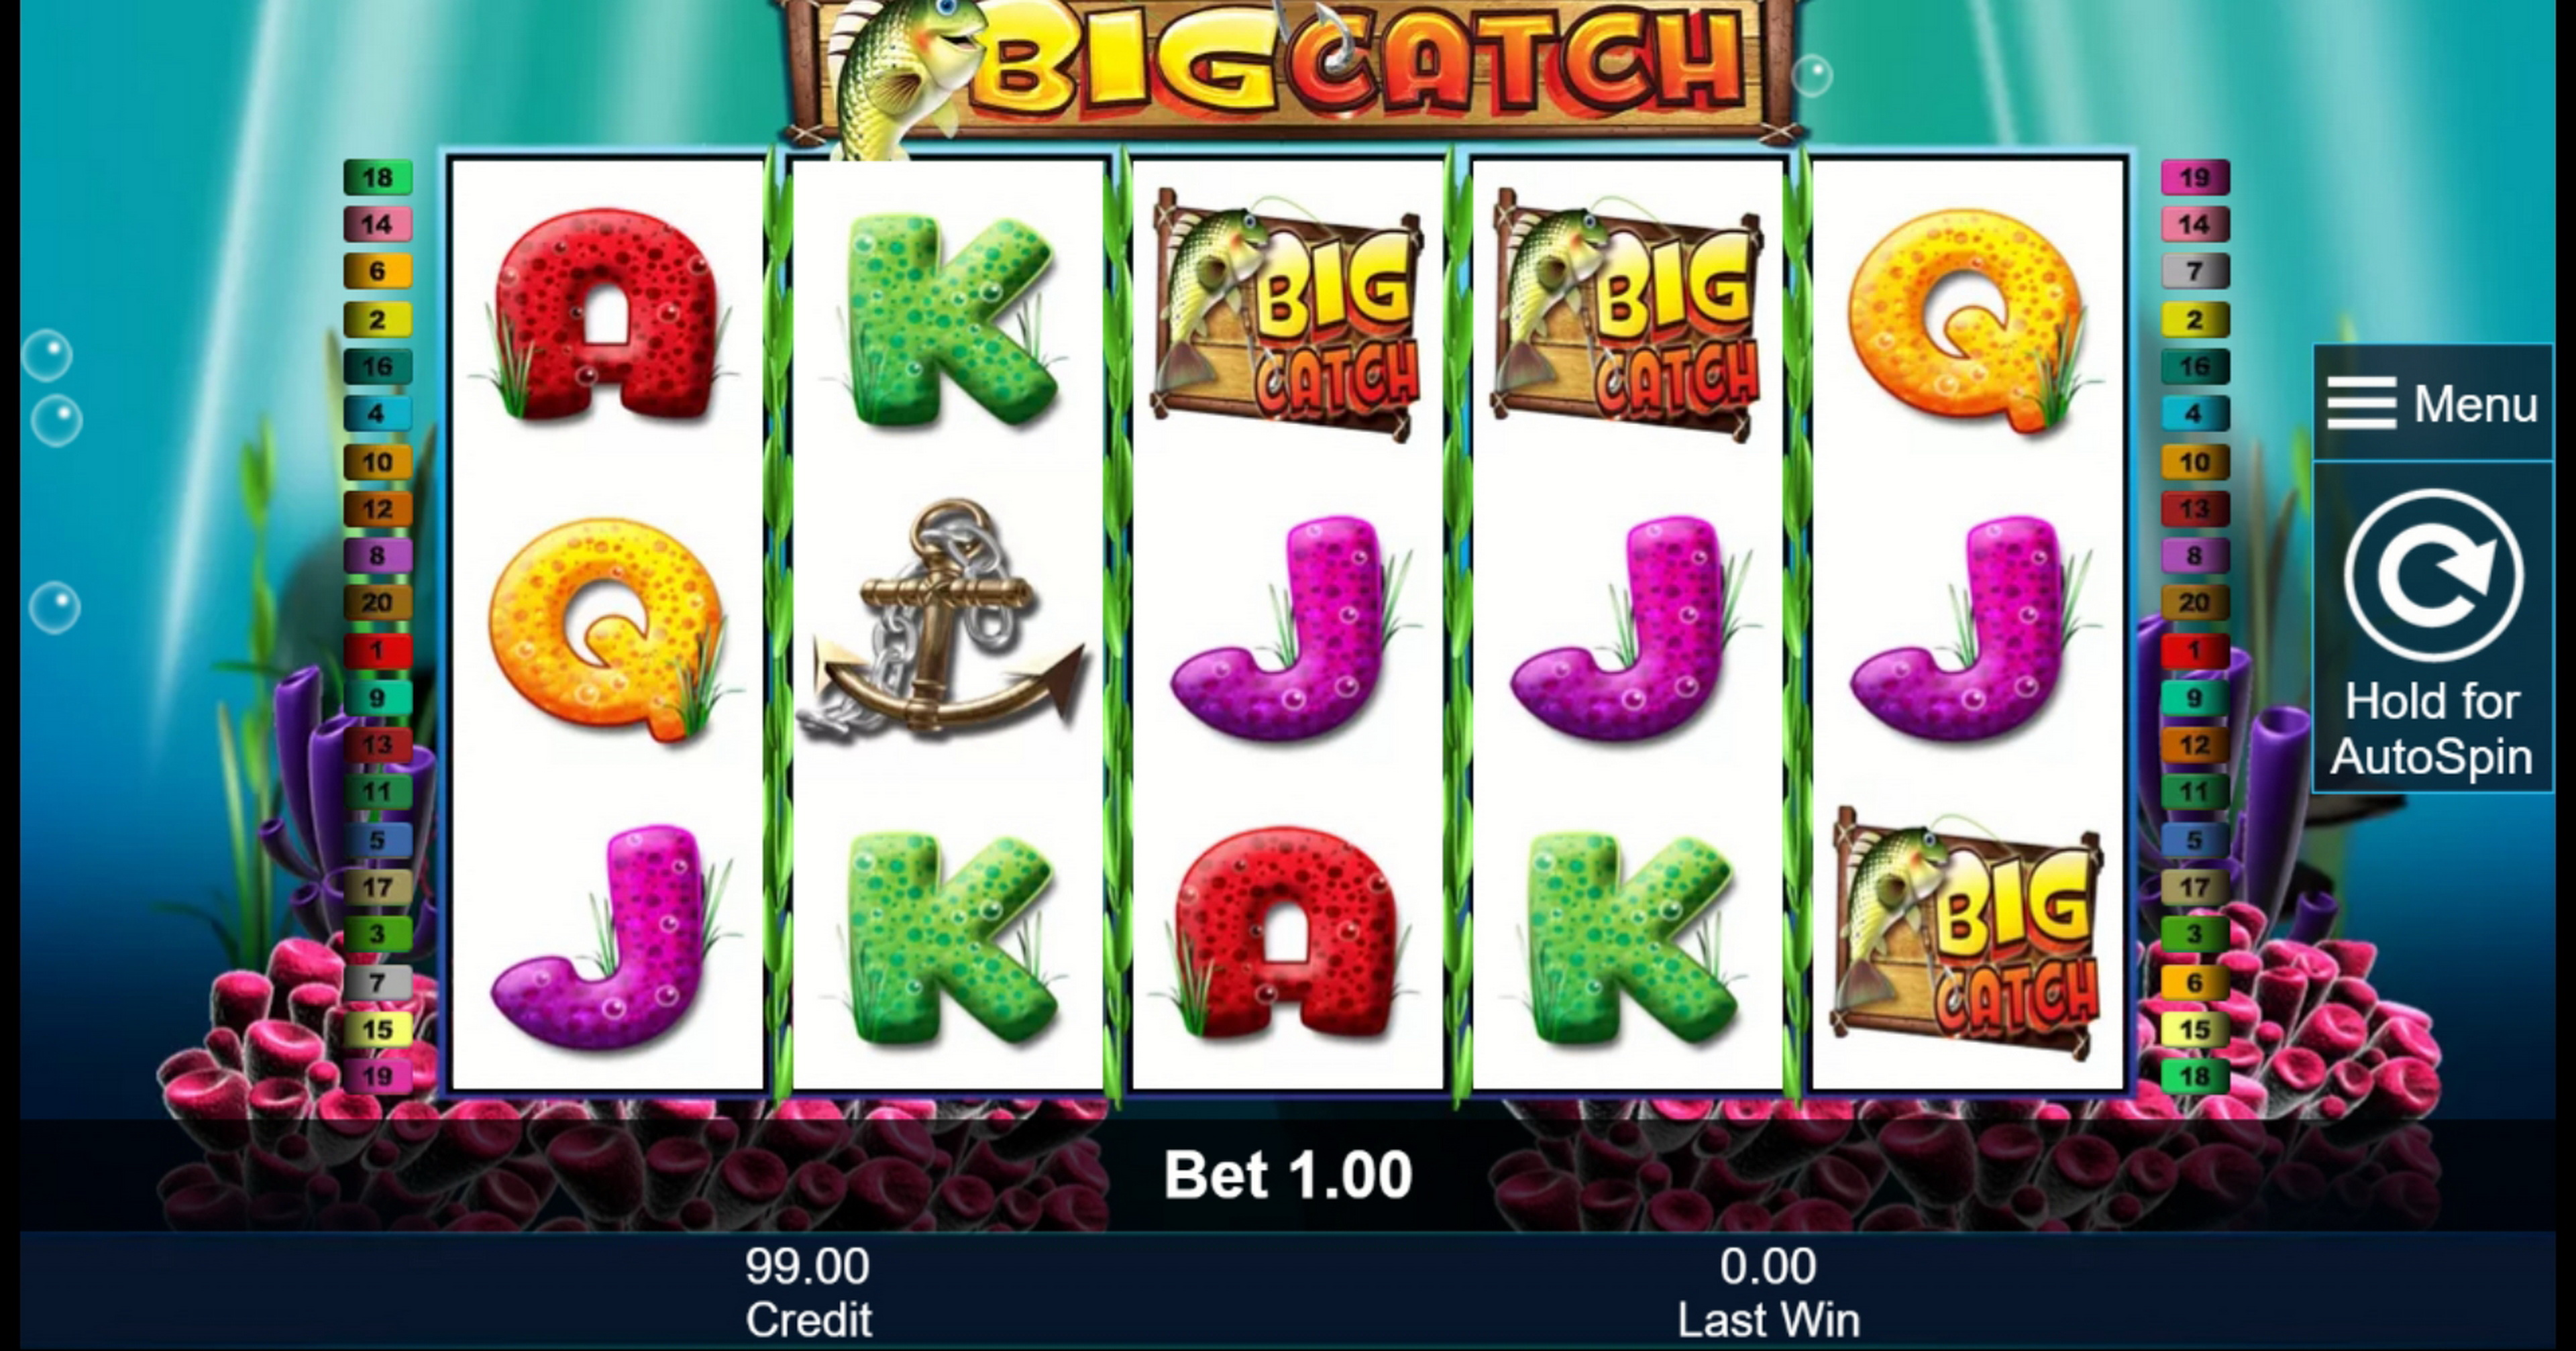 Reels in Big Catch Slot Game by Greentube